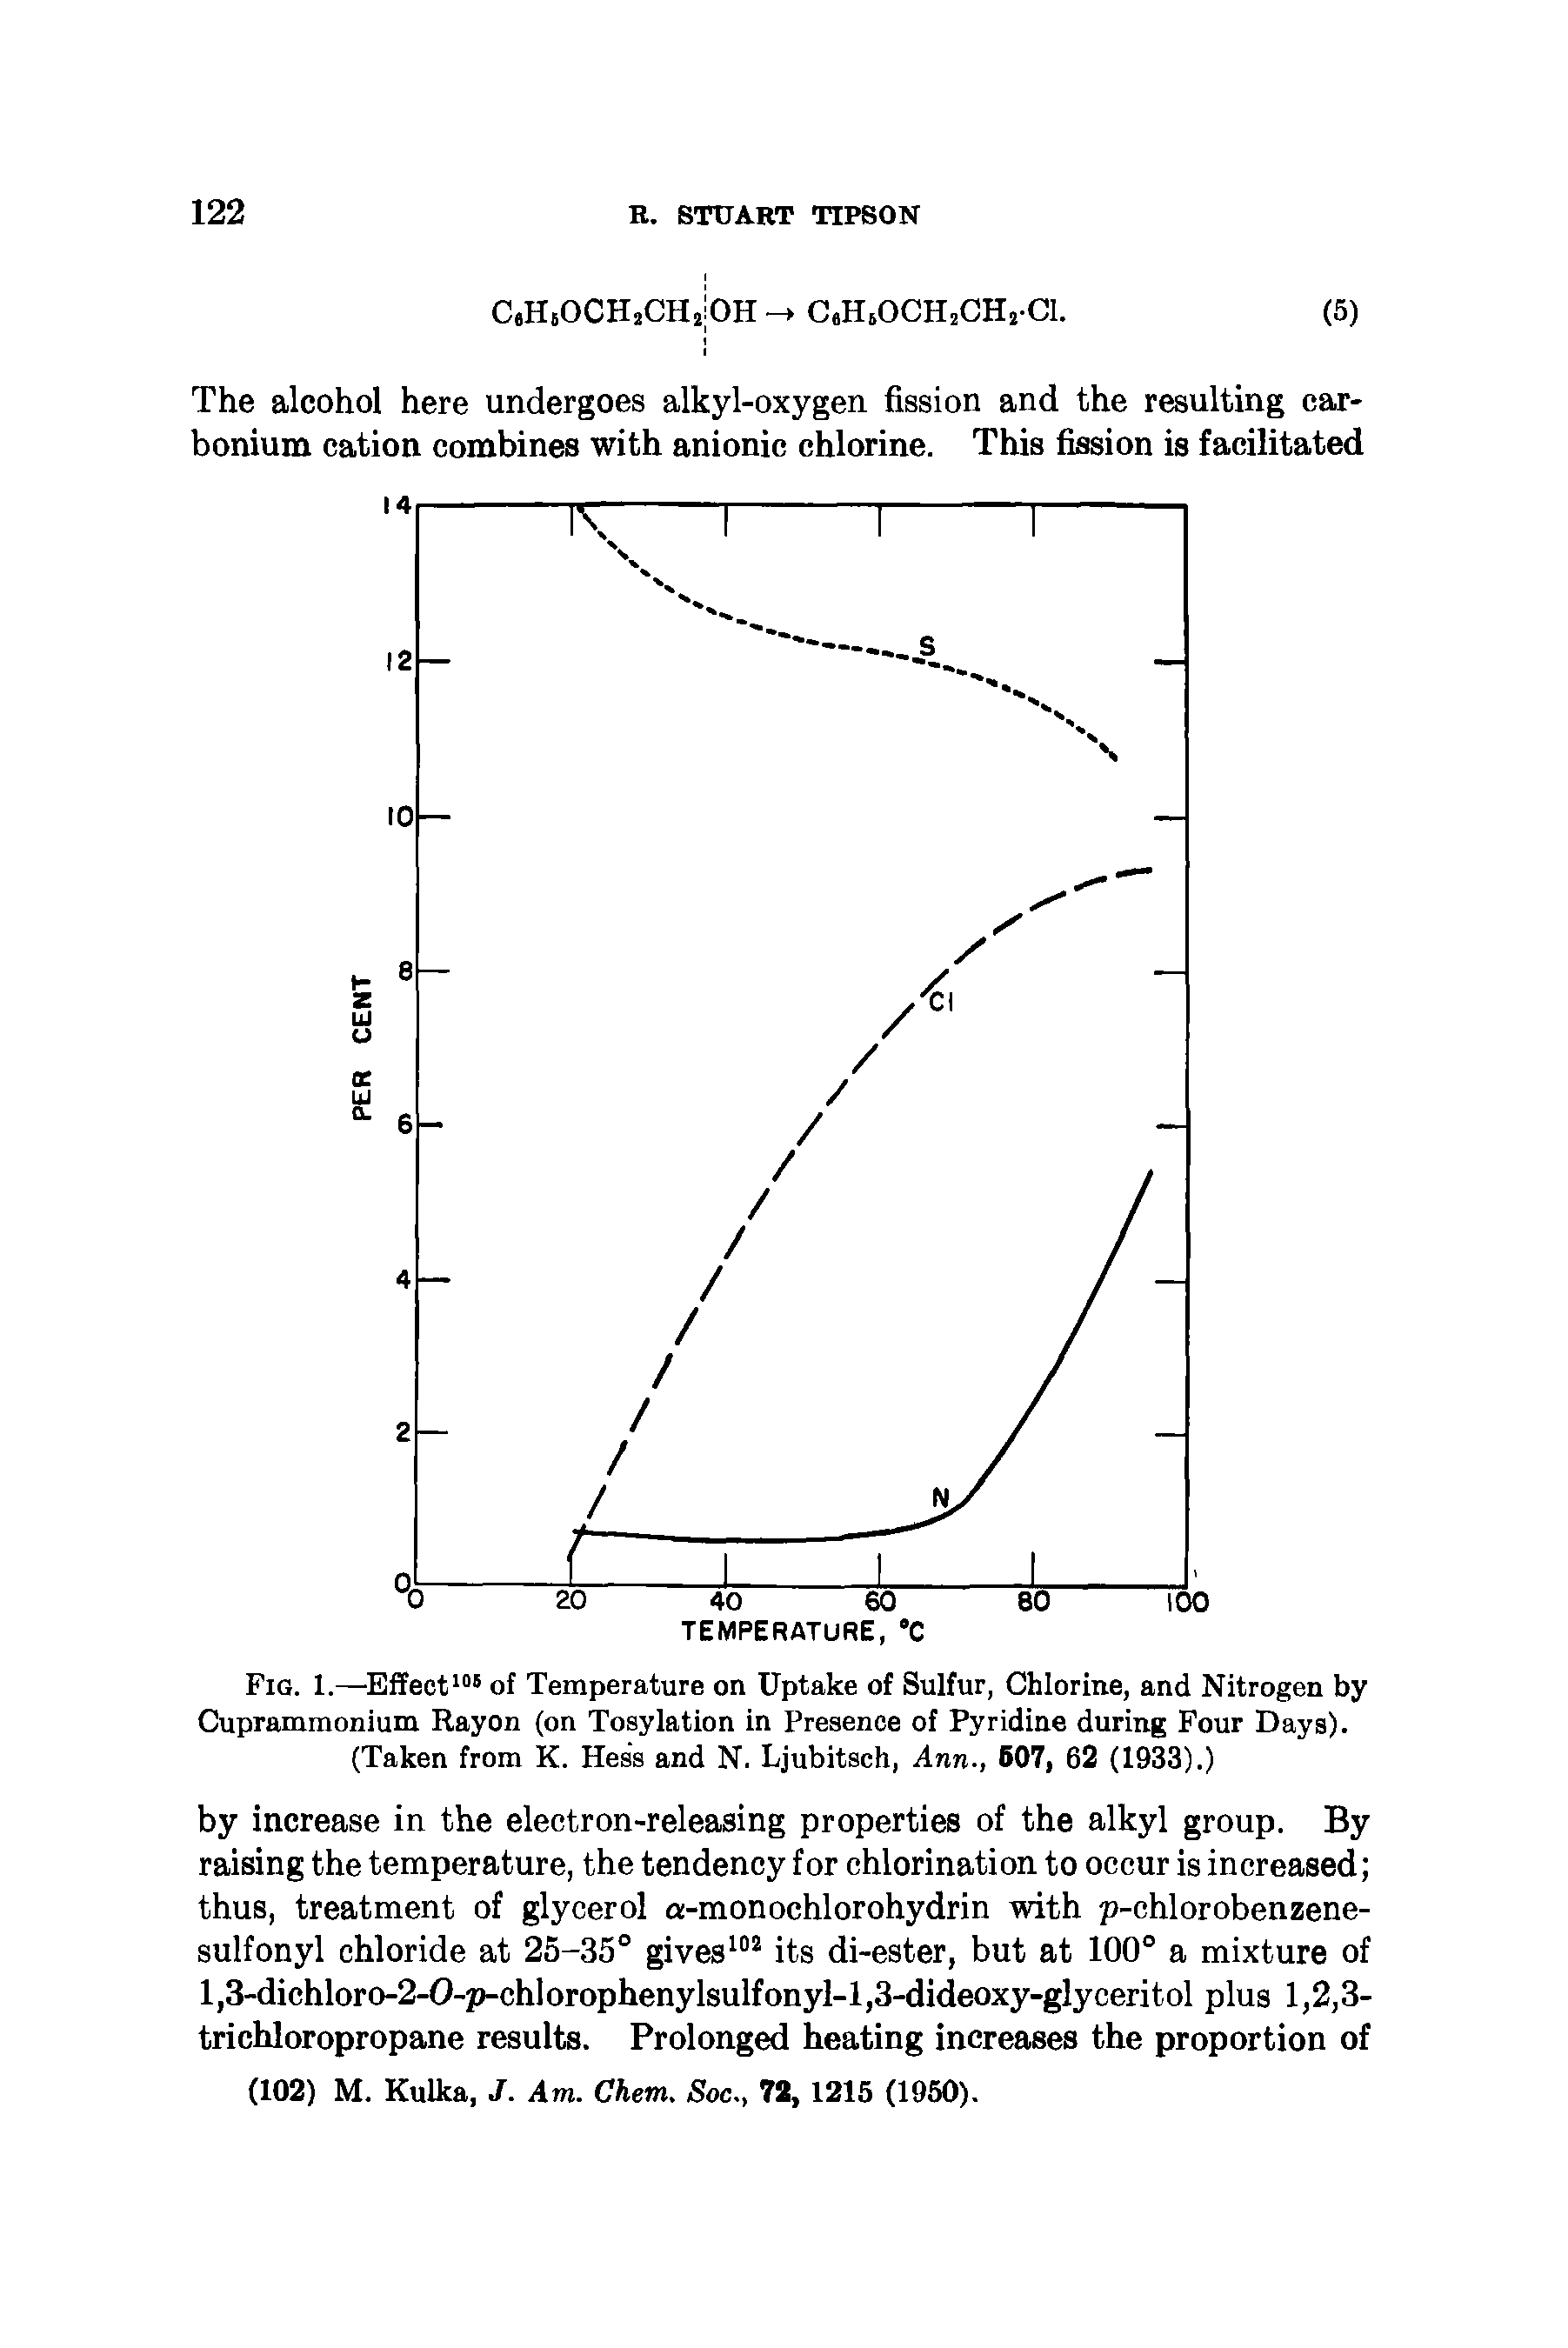 Fig. 1.—Effect105 of Temperature on Uptake of Sulfur, Chlorine, and Nitrogen by Cuprammonium Rayon (on Tosylation in Presence of Pyridine during Four Days). (Taken from K. Hess and N. Ljubitsch, Ann., 507, 62 (1933).)...